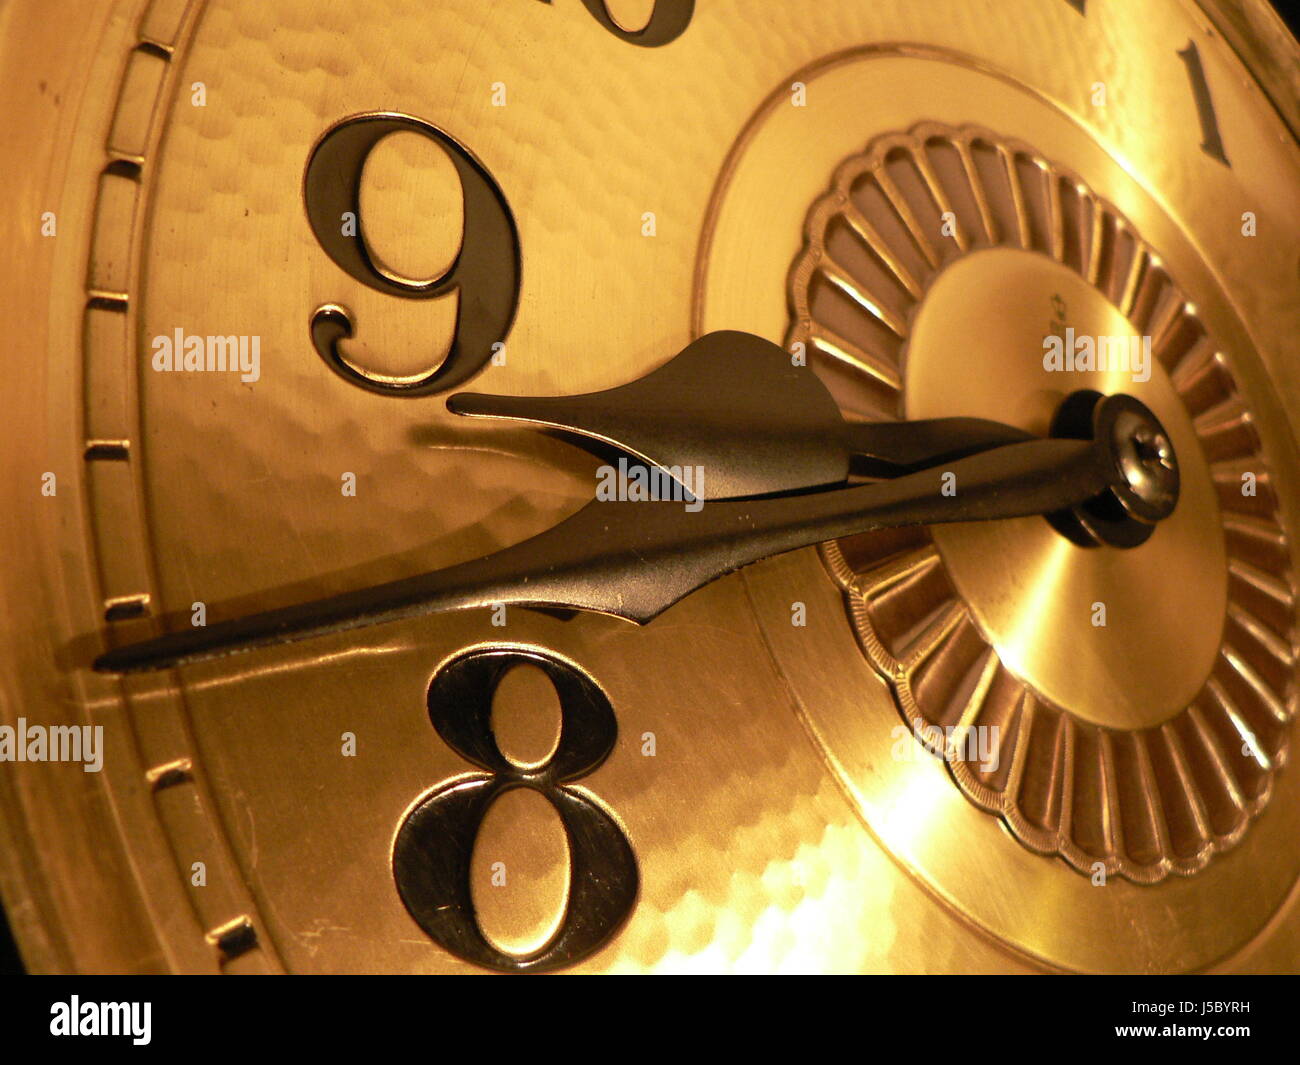 the old grandfather clock Stock Photo